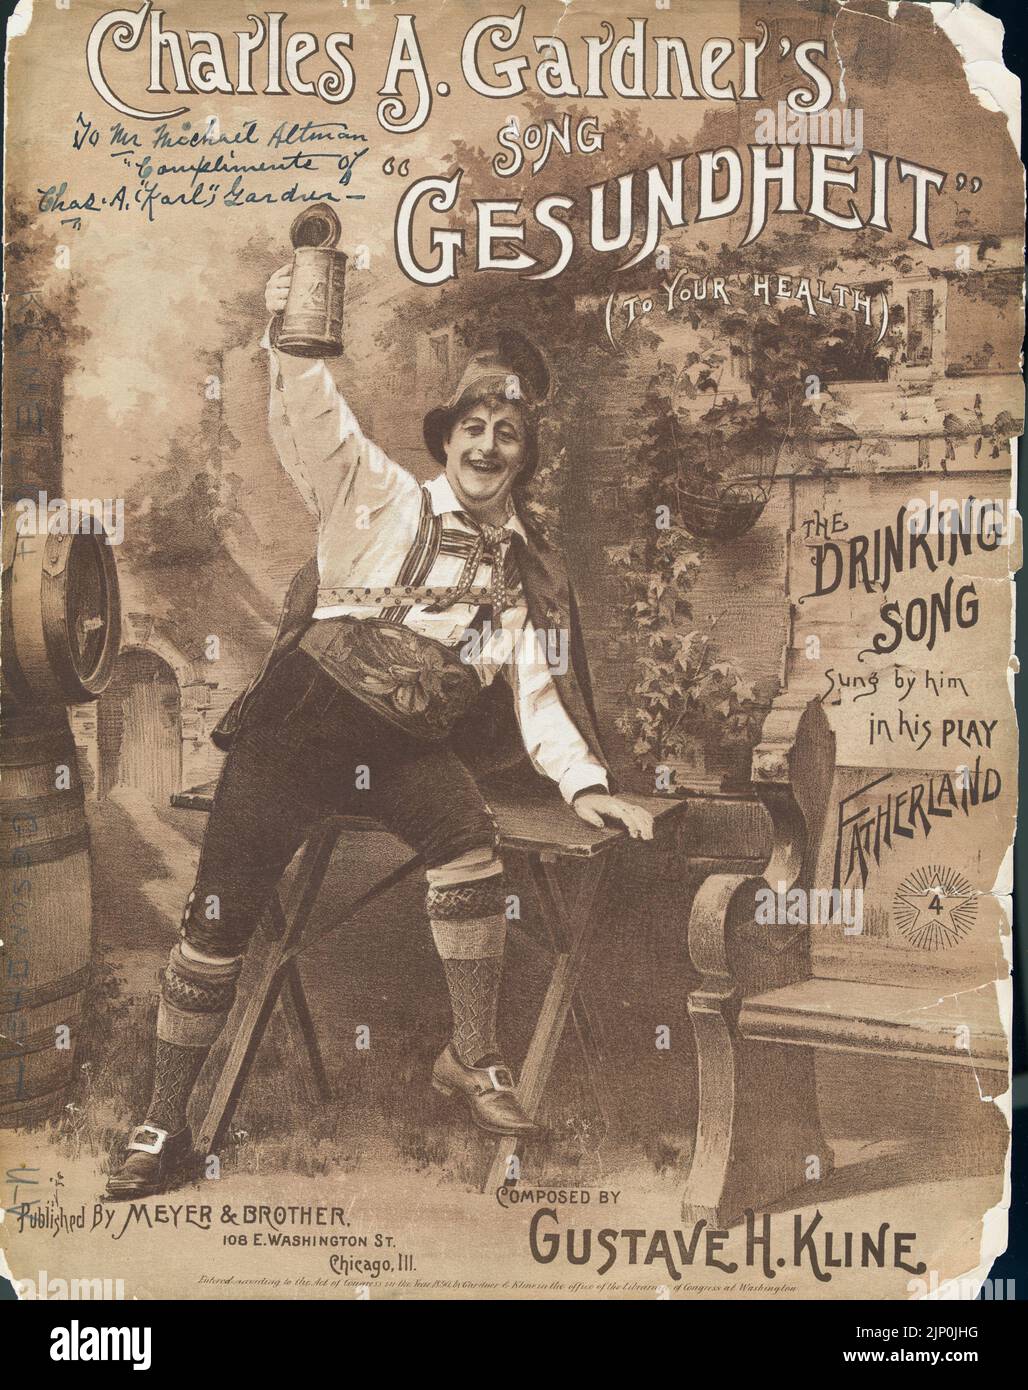 Gesundheit (To your health), Composed by Gustave H. Kline, Lyrics by Marion May, The Drinking Song Sung by Charles A. Gardner in his play Fatherland, Published by Meyer and Brother (1890) Sheet music cover Stock Photo